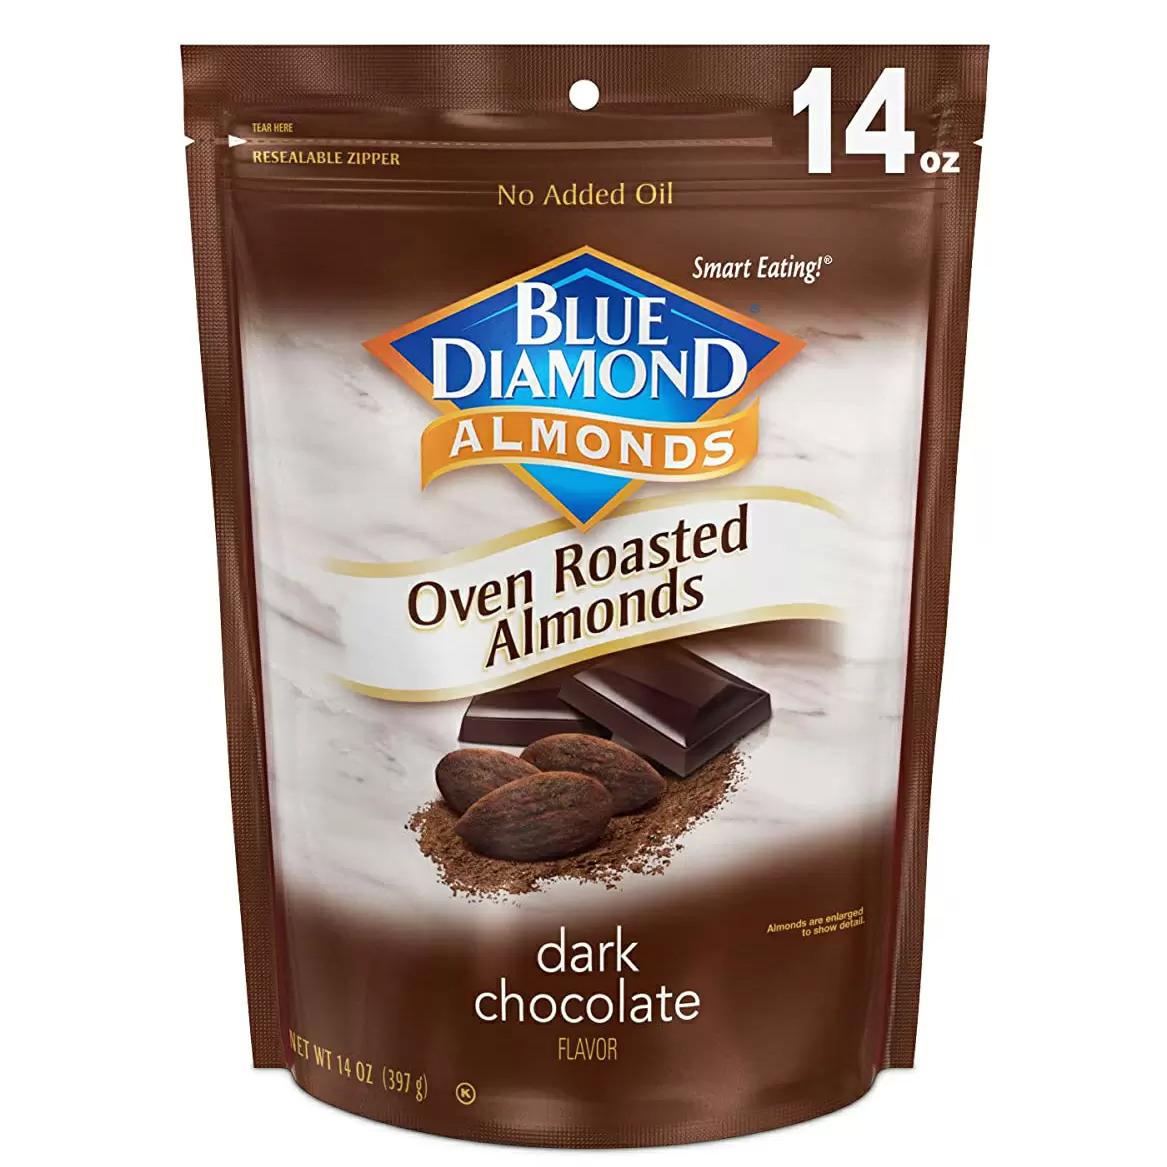 Blue Diamond Almonds Oven Roasted Dark Chocolate for $5.69 Shipped